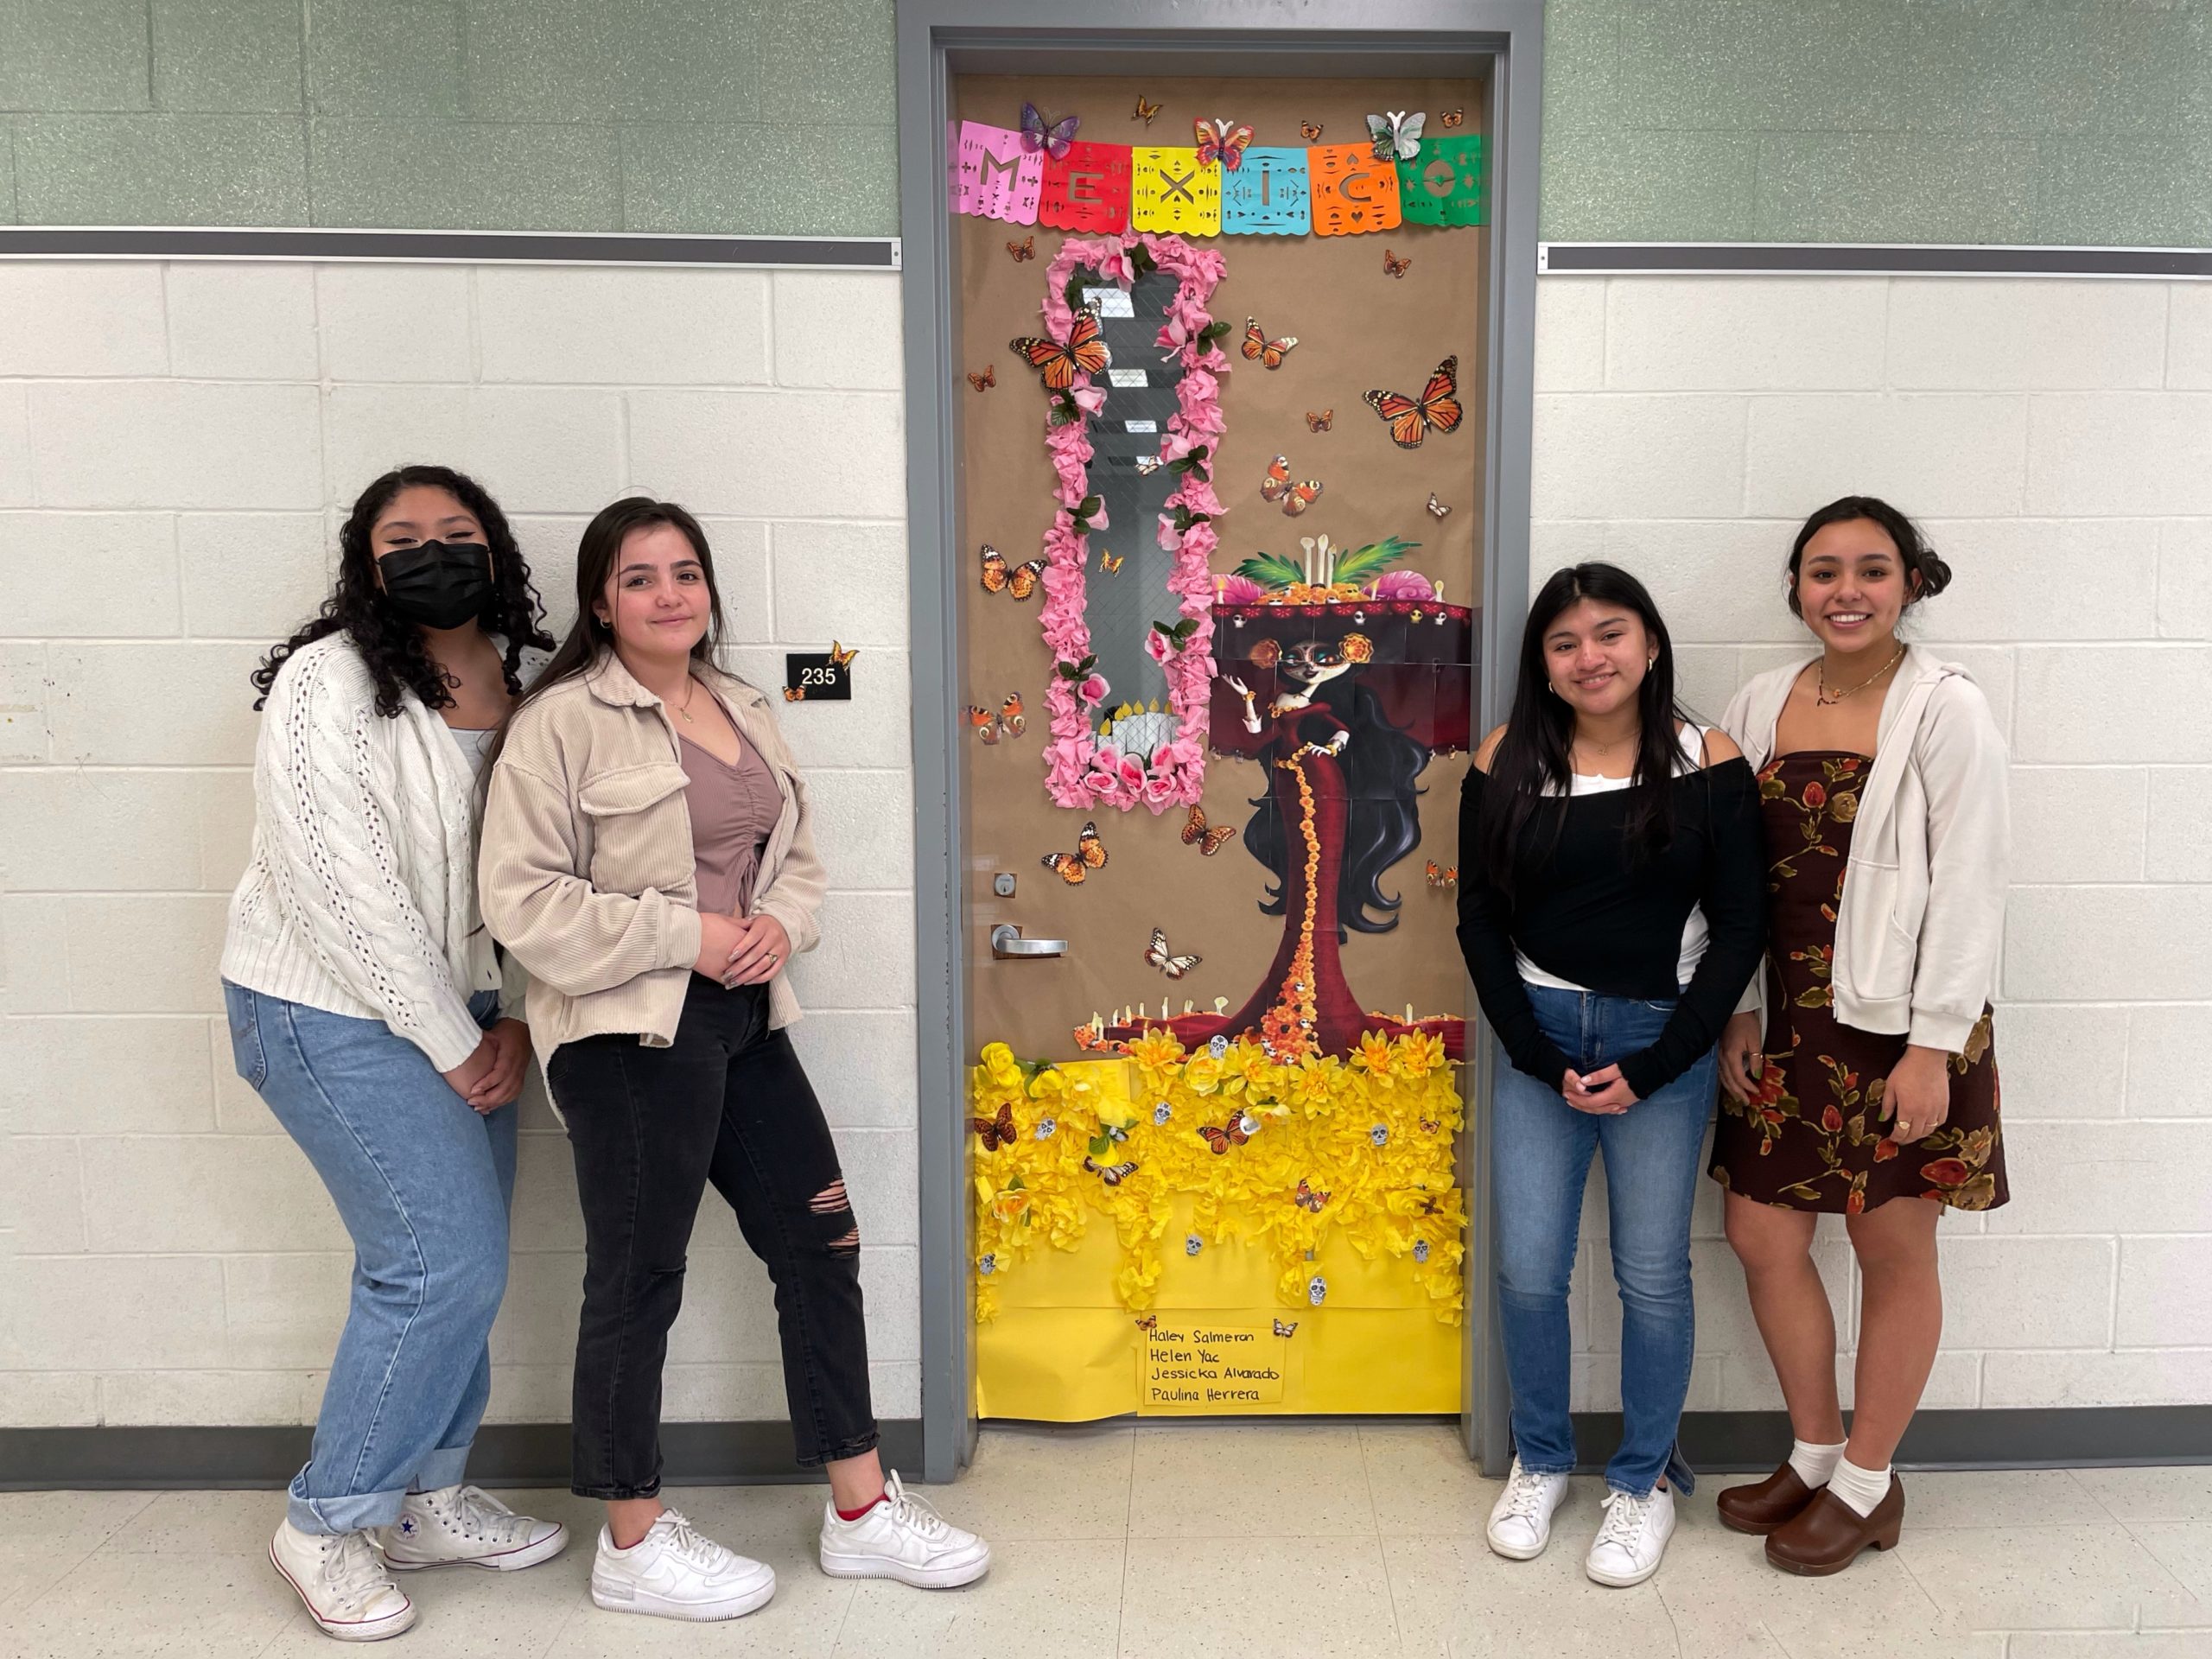 To mark National Foreign Language Week, Westhampton Beach High School’s French and Spanish clubs hosted a door decorating competition, with more than 100 students participating. Working in groups, students competed to decorate classroom doors to celebrate the language and culture of countries around the world. The foreign language department faculty voted on the “best dressed” doors and the winning group  was Jessicka Alvarado, Paulina Herrera, Haley Salmeran and Helen Yac with the theme of Mexico.